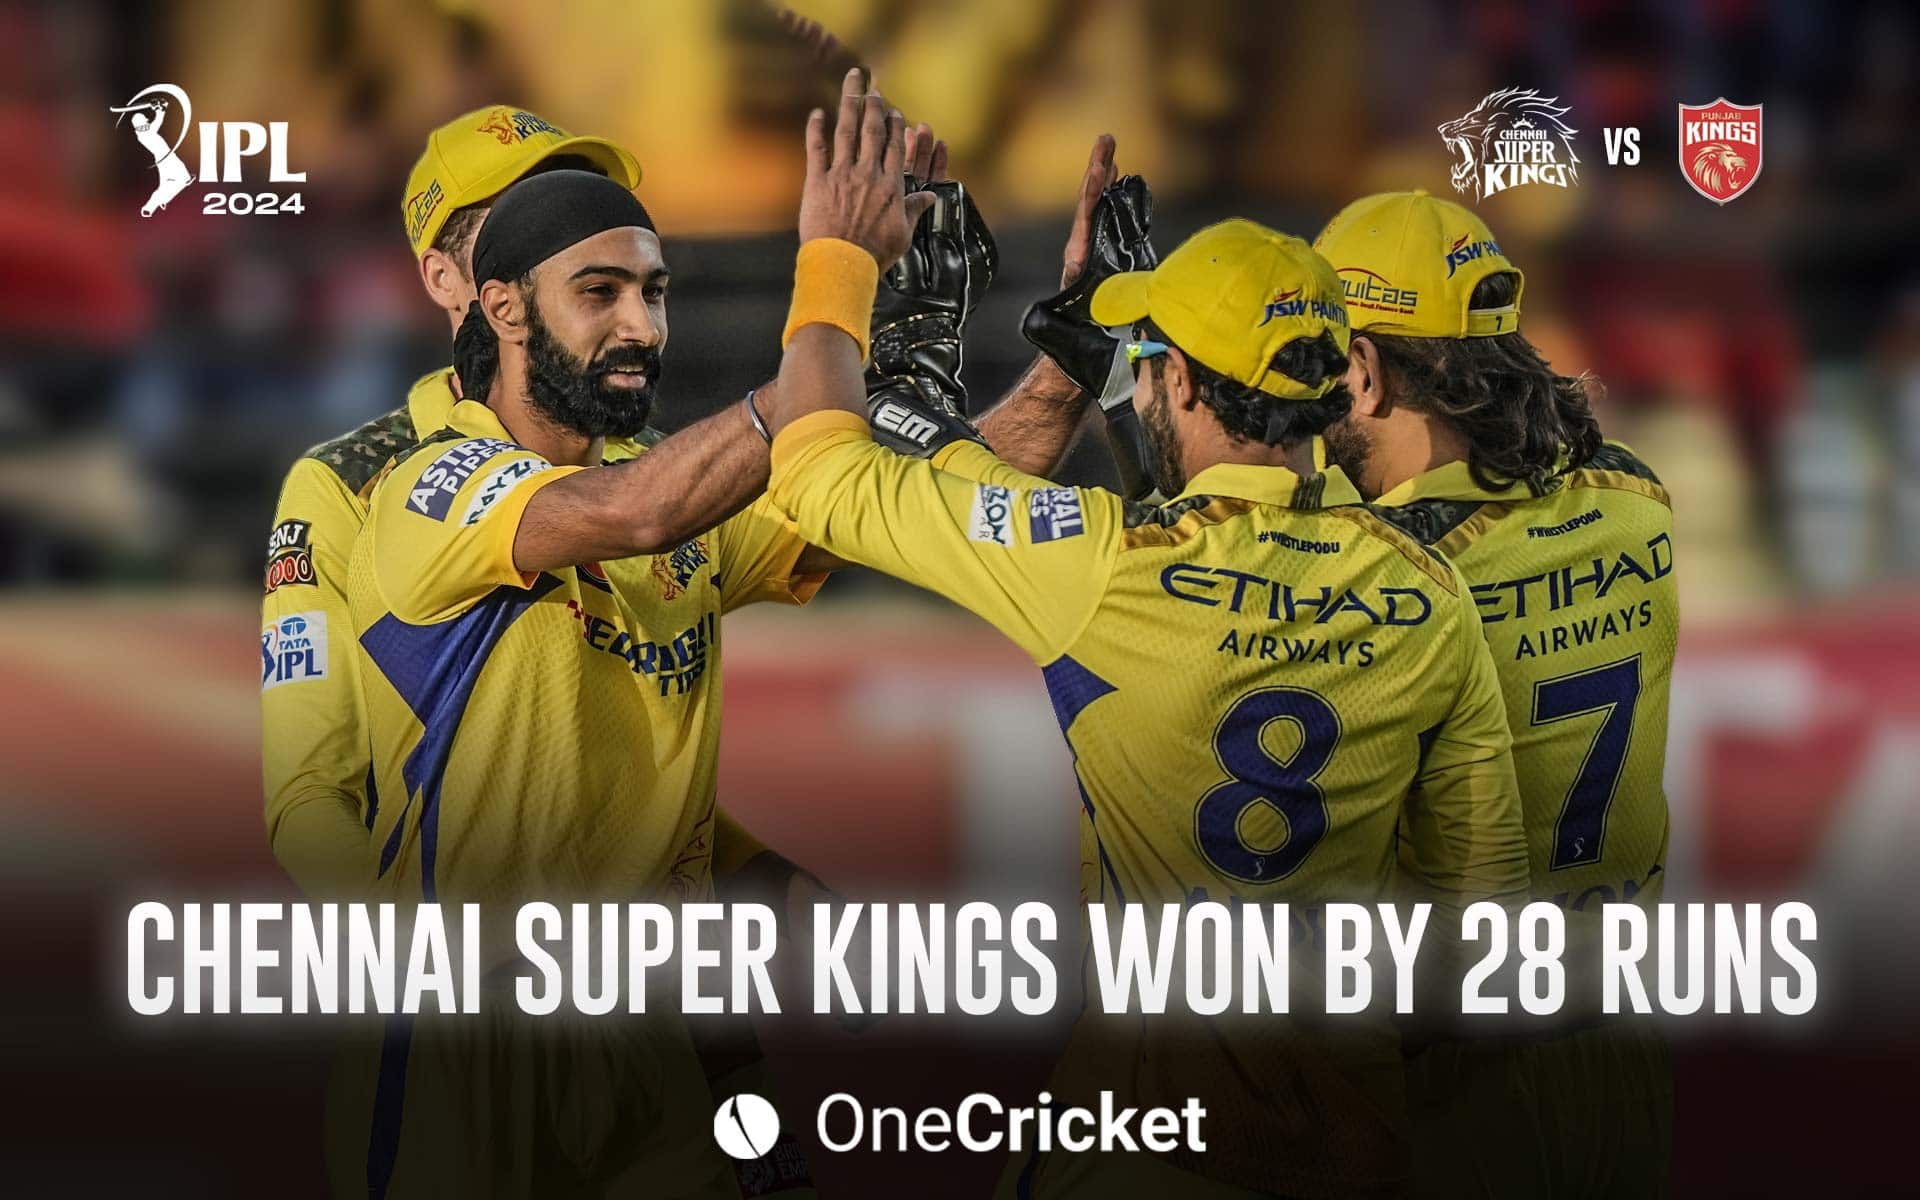 Super Kings won by 28 runs [OneCricket]
